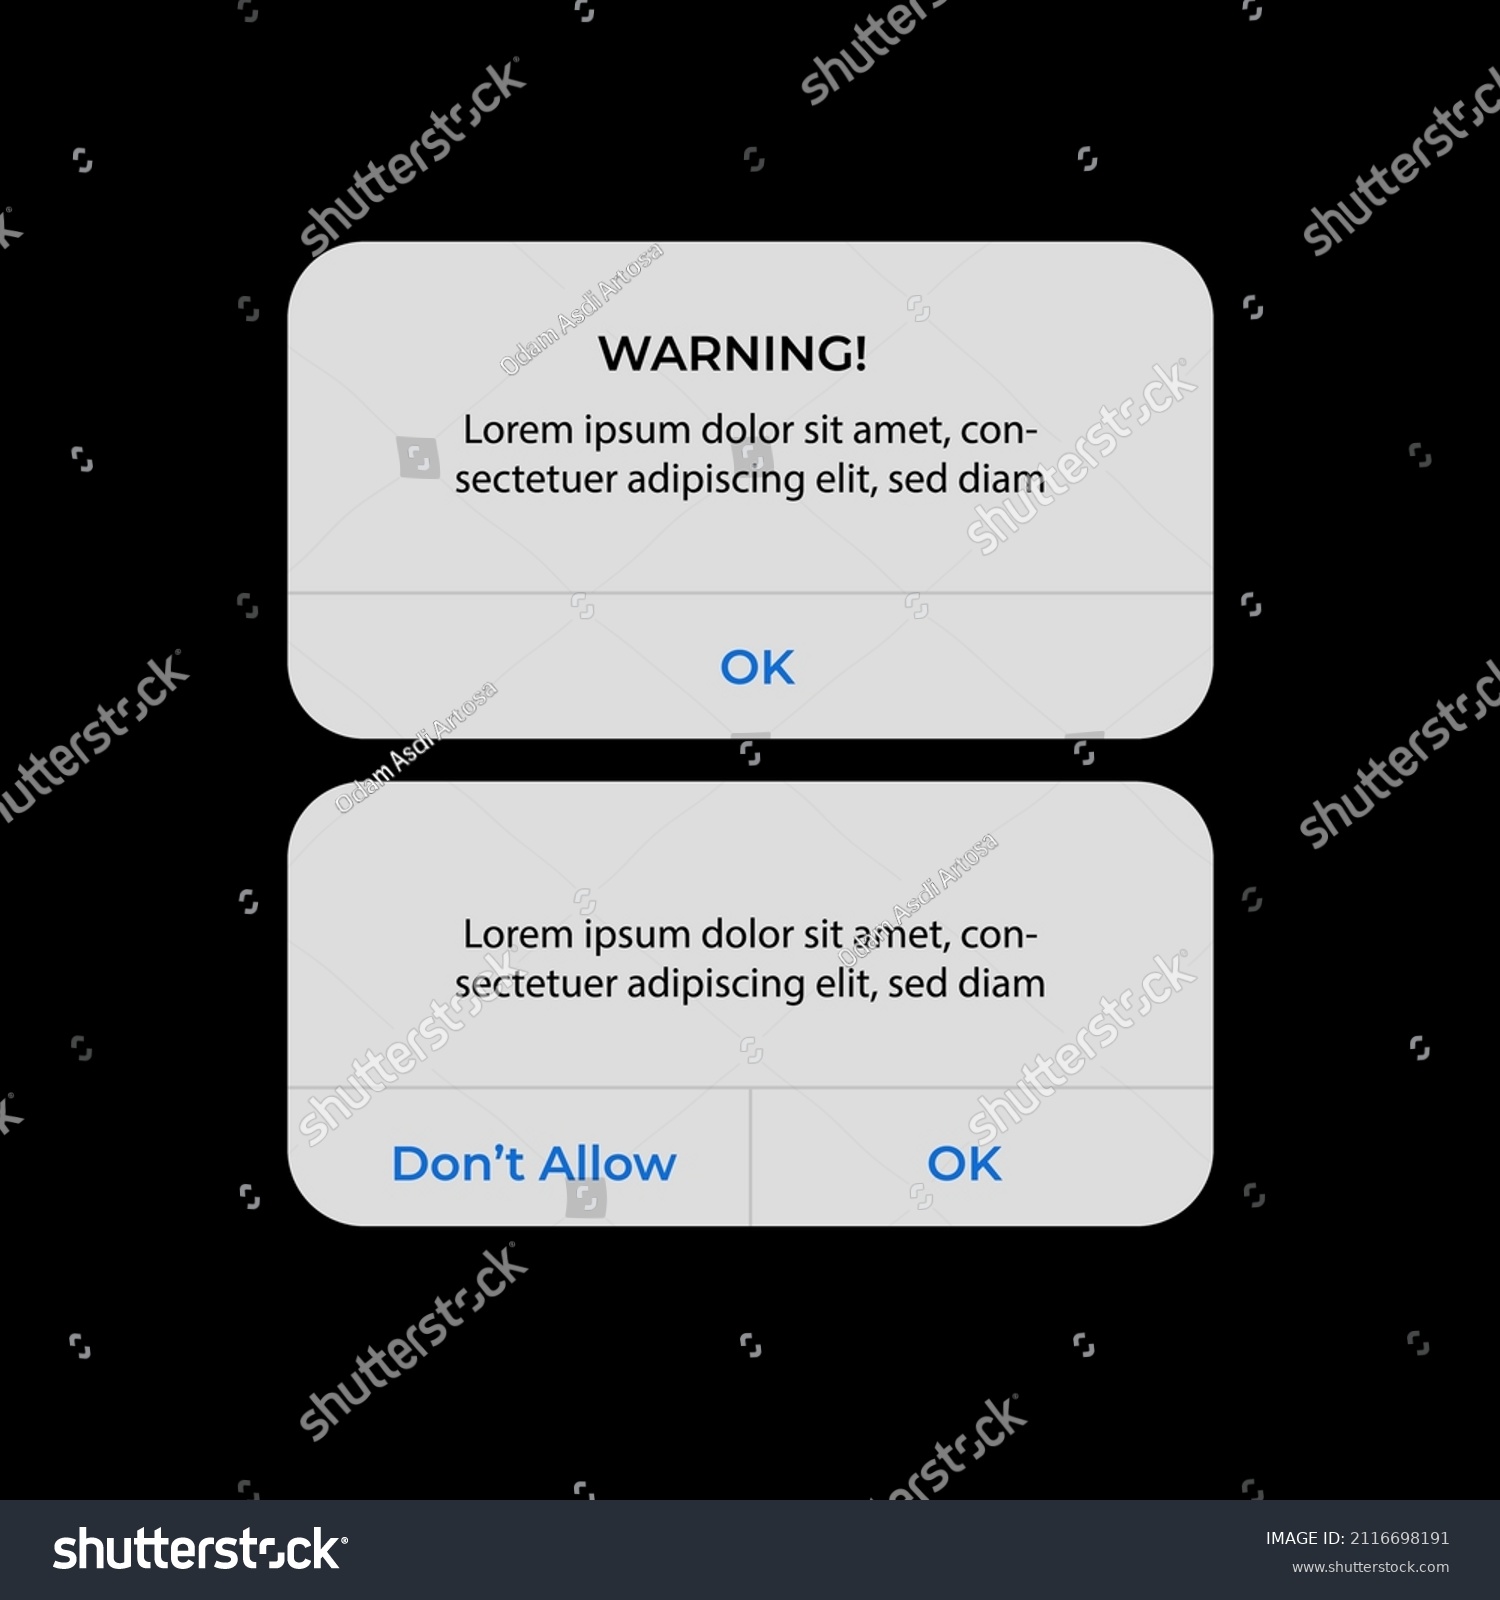 Iphone Notification Boxes Template. Smartphone Warning or Message Interface. Vector illustration. Android. Smartphone #2116698191